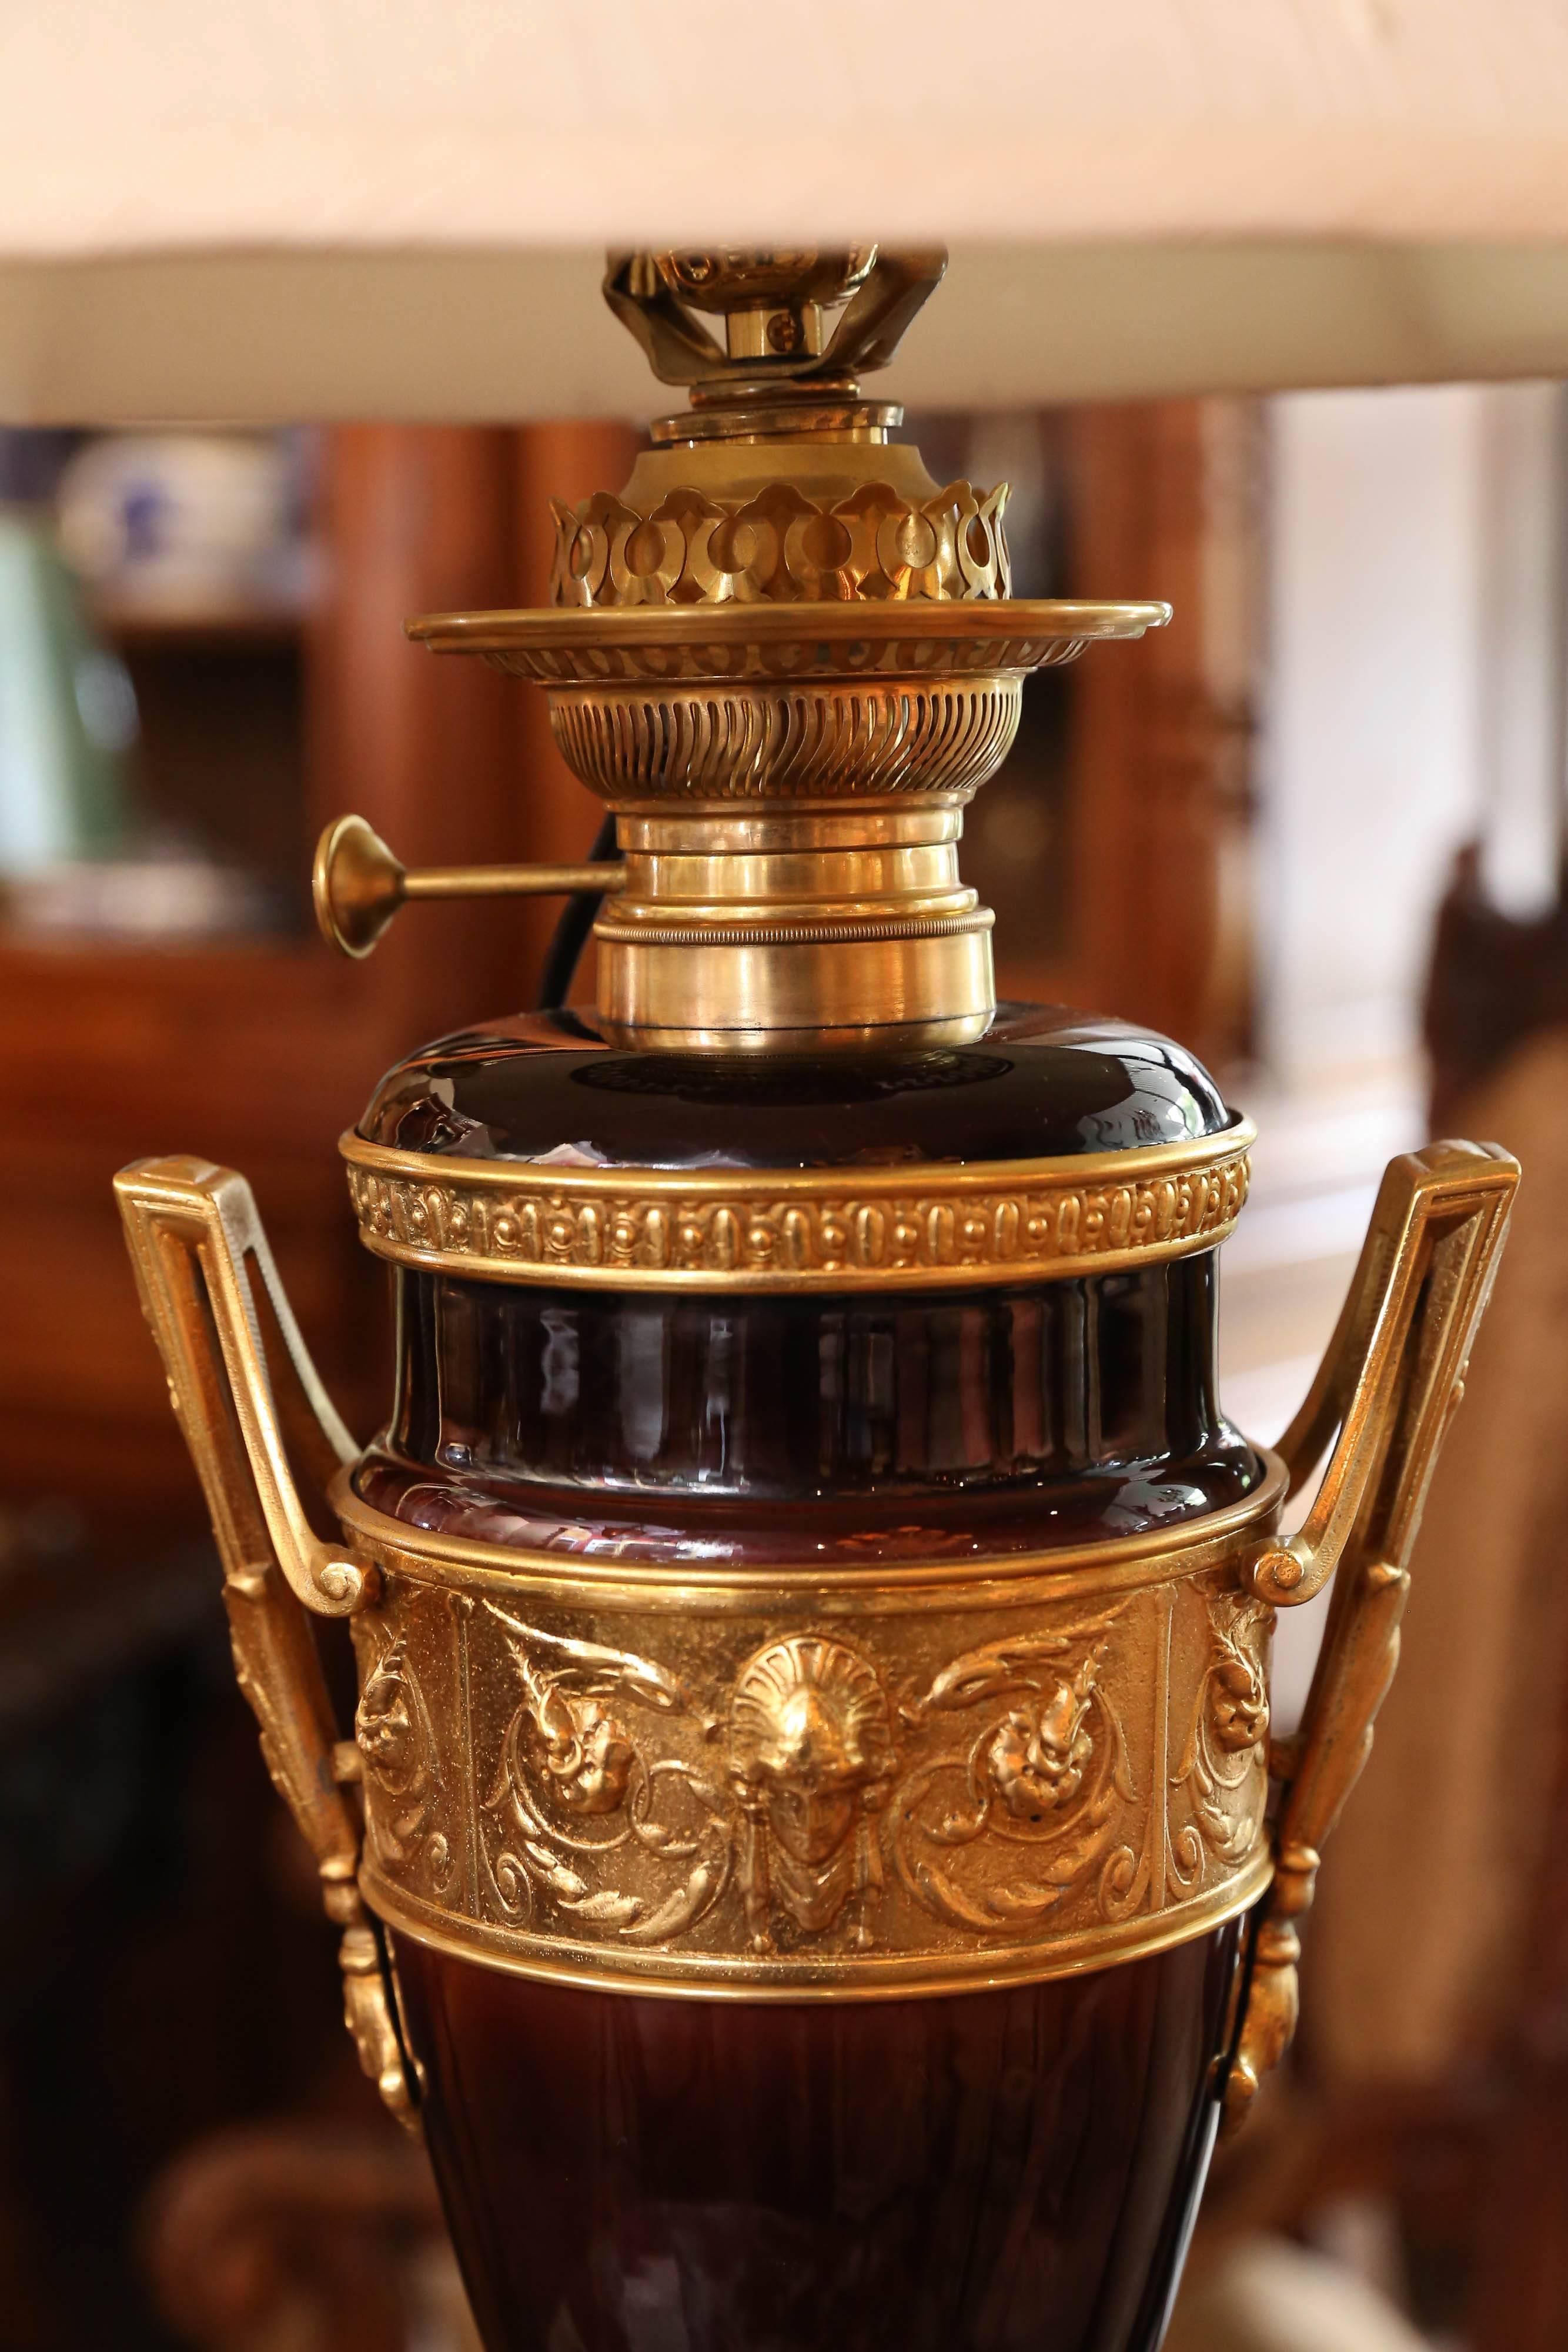 Bronze colored porcelain with gilt porcelain mounts set on a square base of
Gilt bronze. The urn form is banded in bronze doré with scrolls and
Centered with a mask. Decorative handles are on each side.
They are by Hugo Schneider in Lipzeig